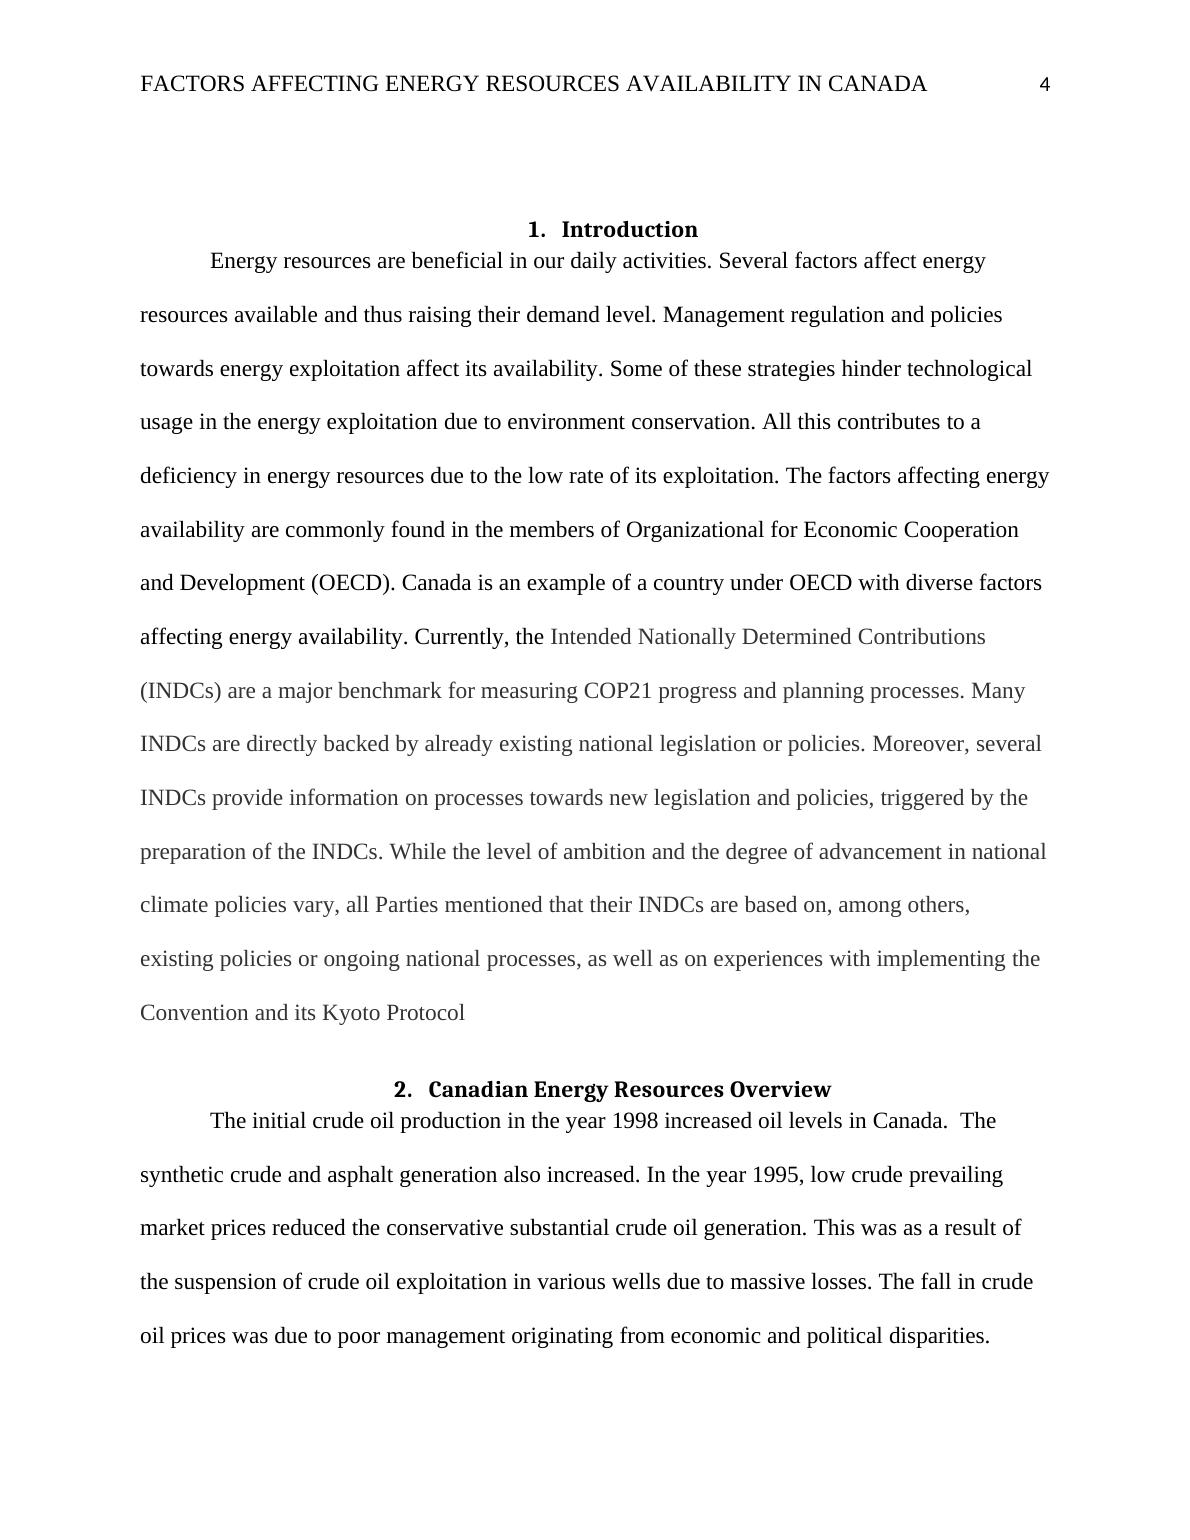 Factors Affecting Energy Resources Availability in Canada_4